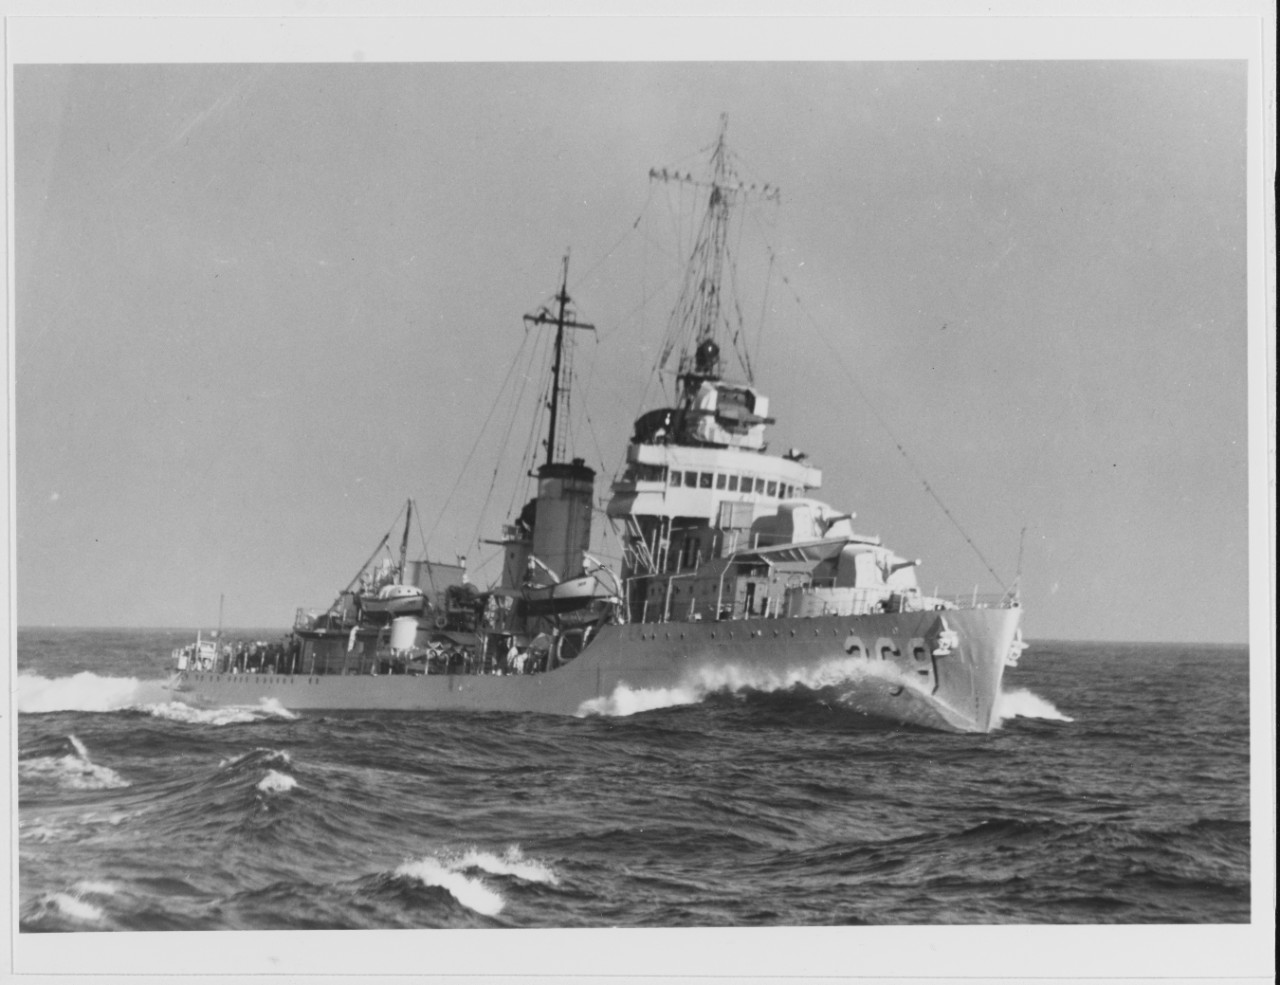 USS REID (DD-369) underway at high speed, at sea during the later 1930s